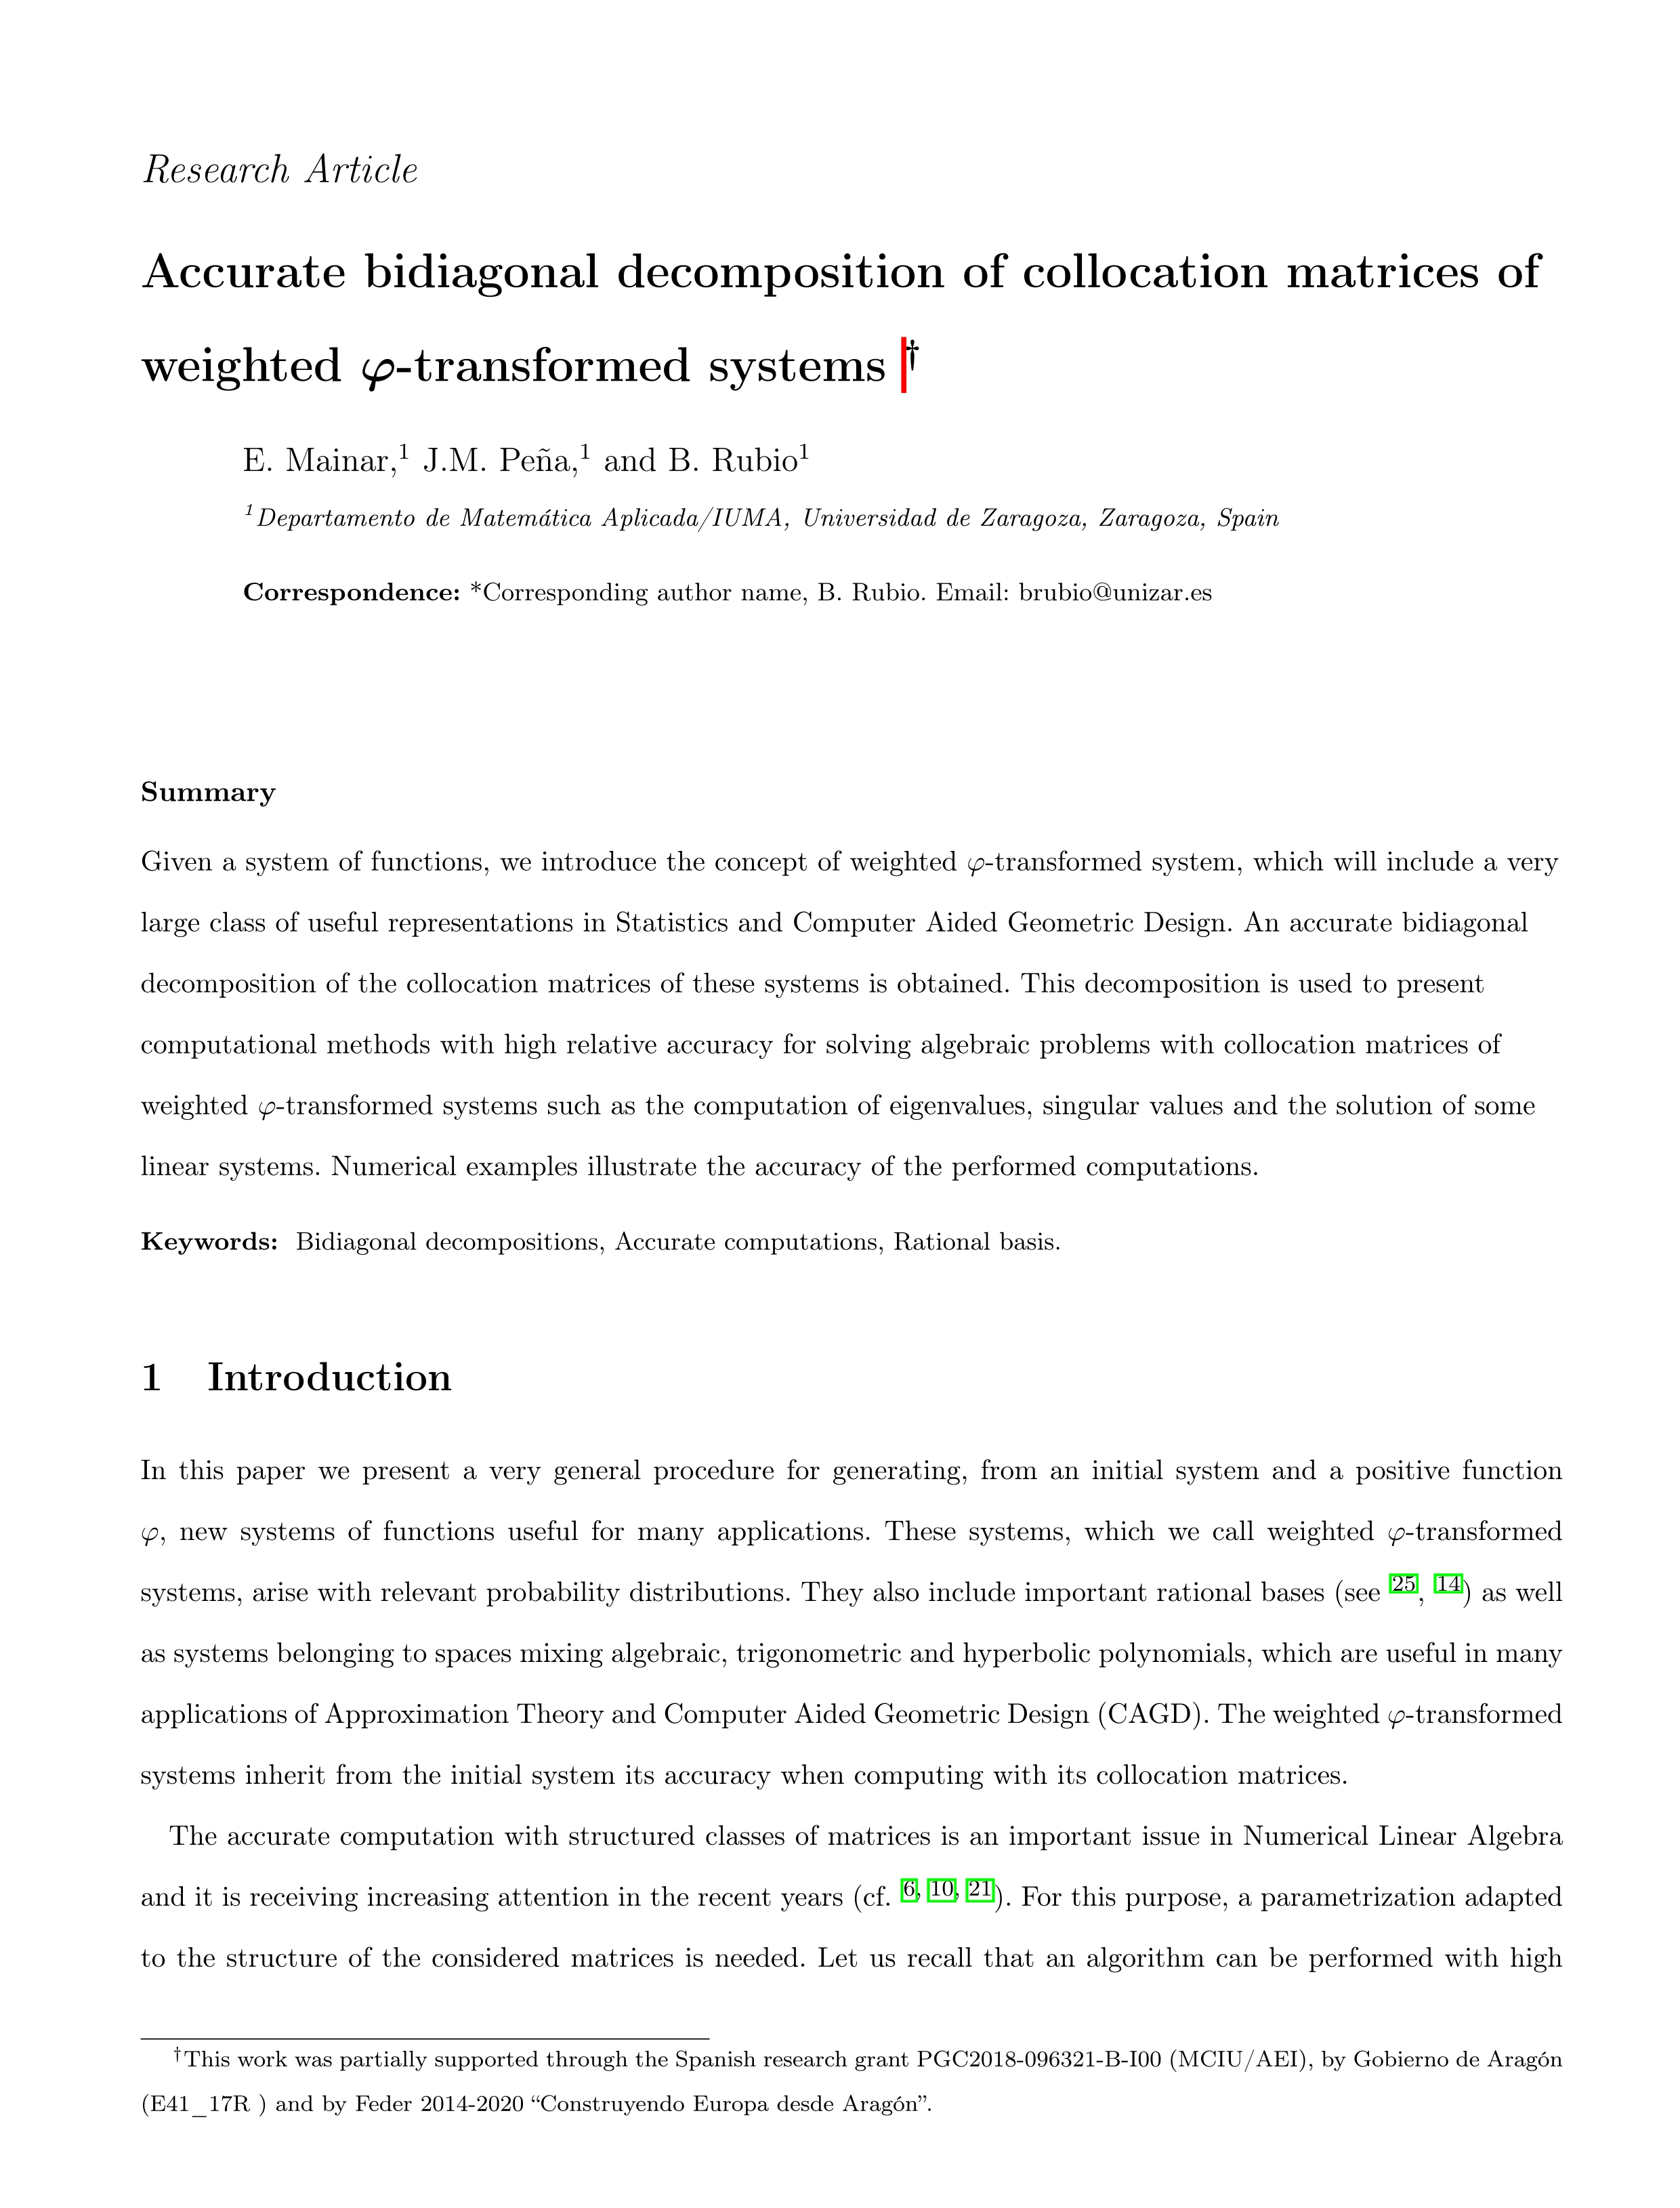 Accurate bidiagonal decomposition of collocation matrices of weighted ¿-transformed systems